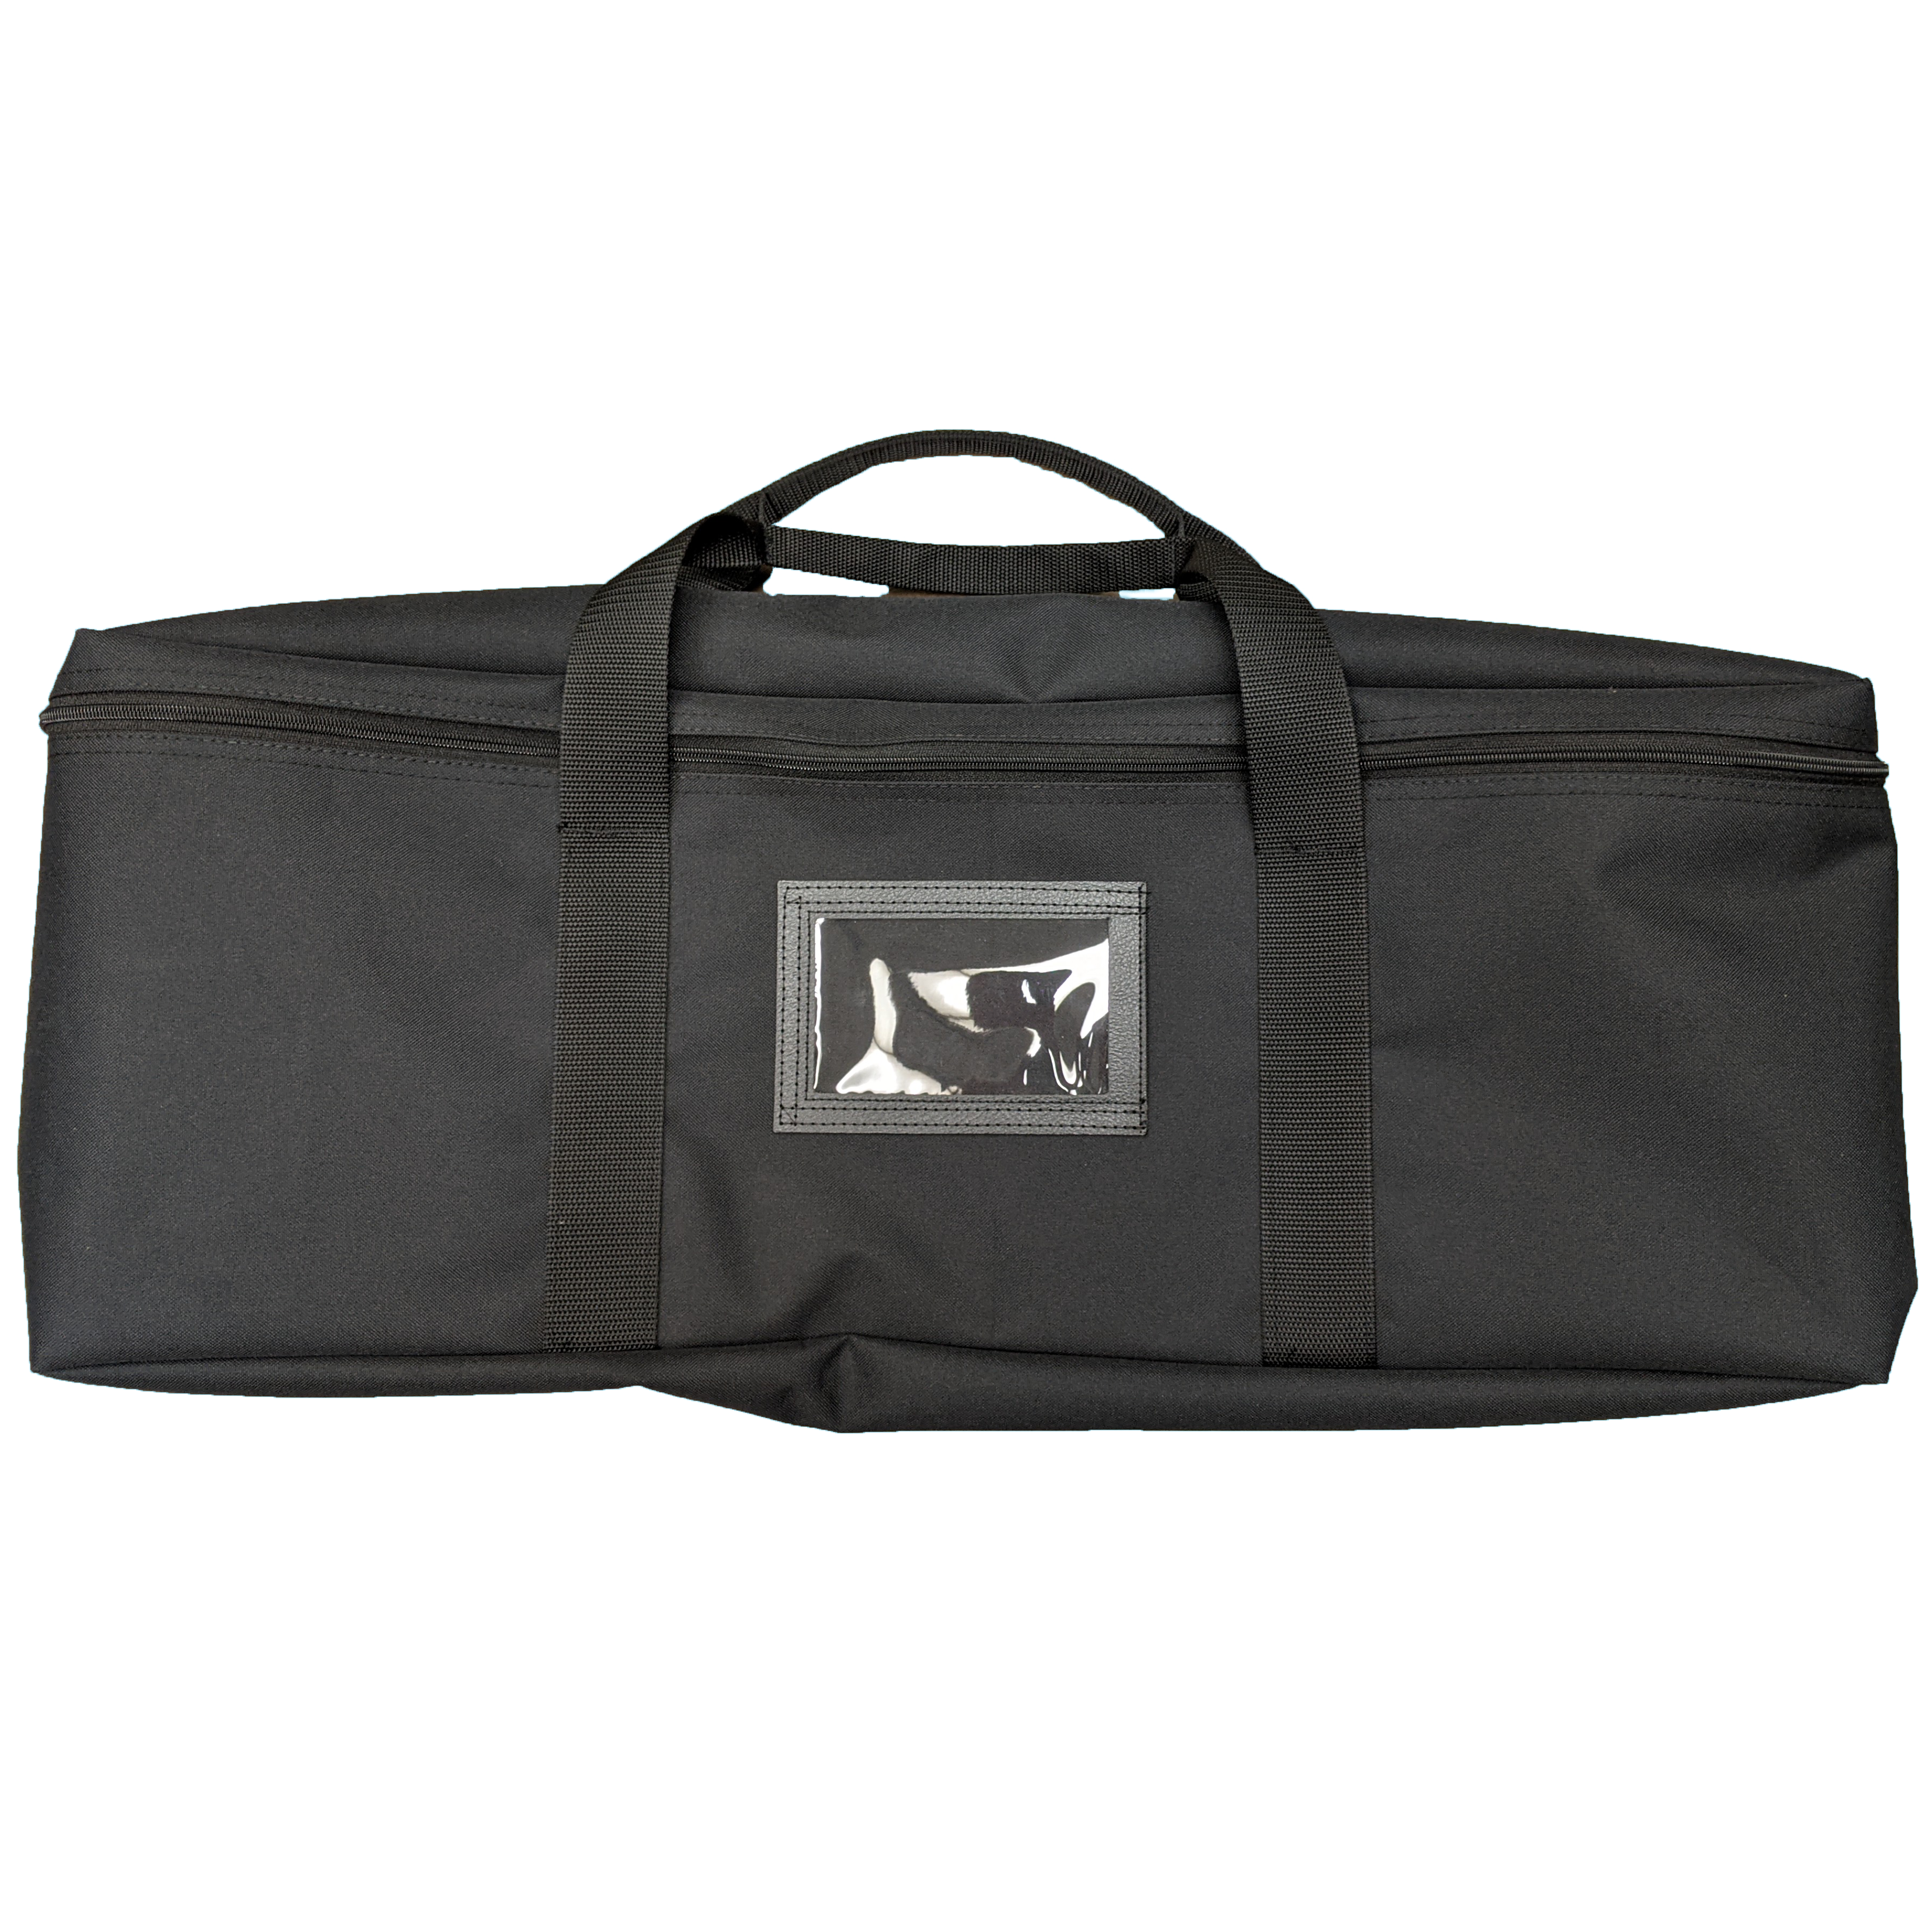 4-Wheel Collapsible Supply Bag with Height Extenders - A. Rifkin Co.